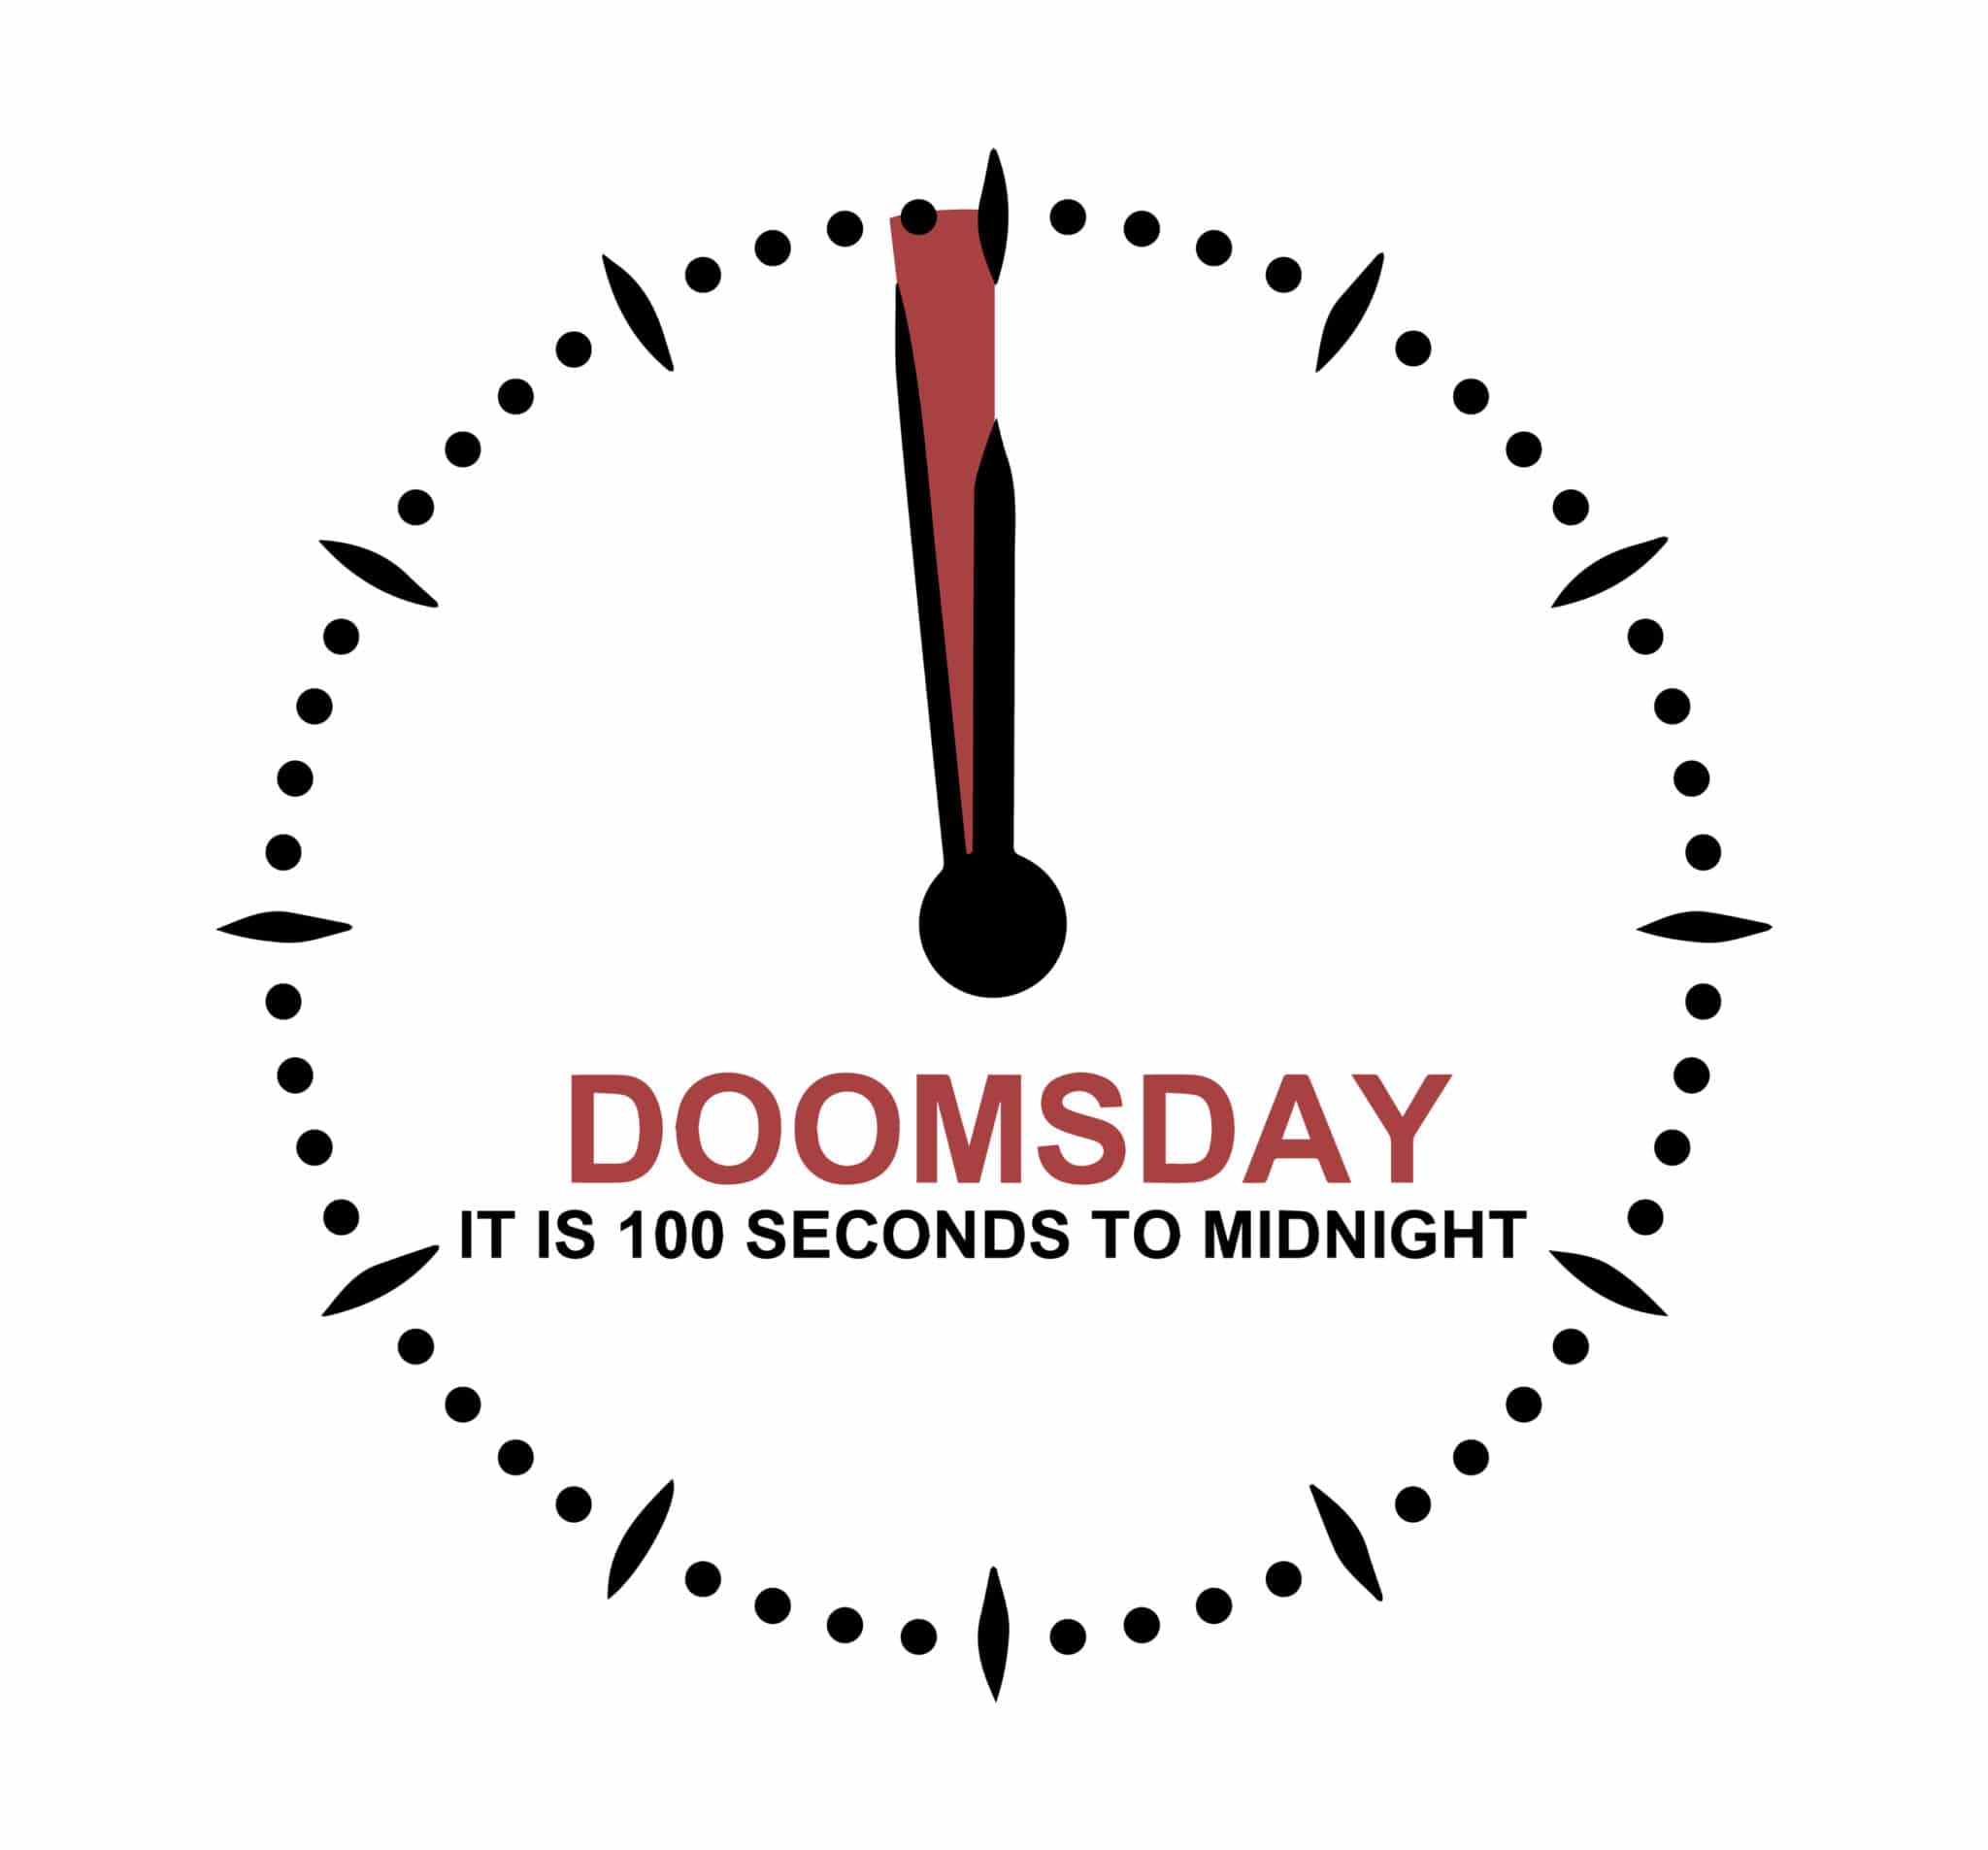 Doomsday Clock stands at 100 seconds to midnight, World 'remains in an extremely dangerous moment', Closest ever to Apocalypse